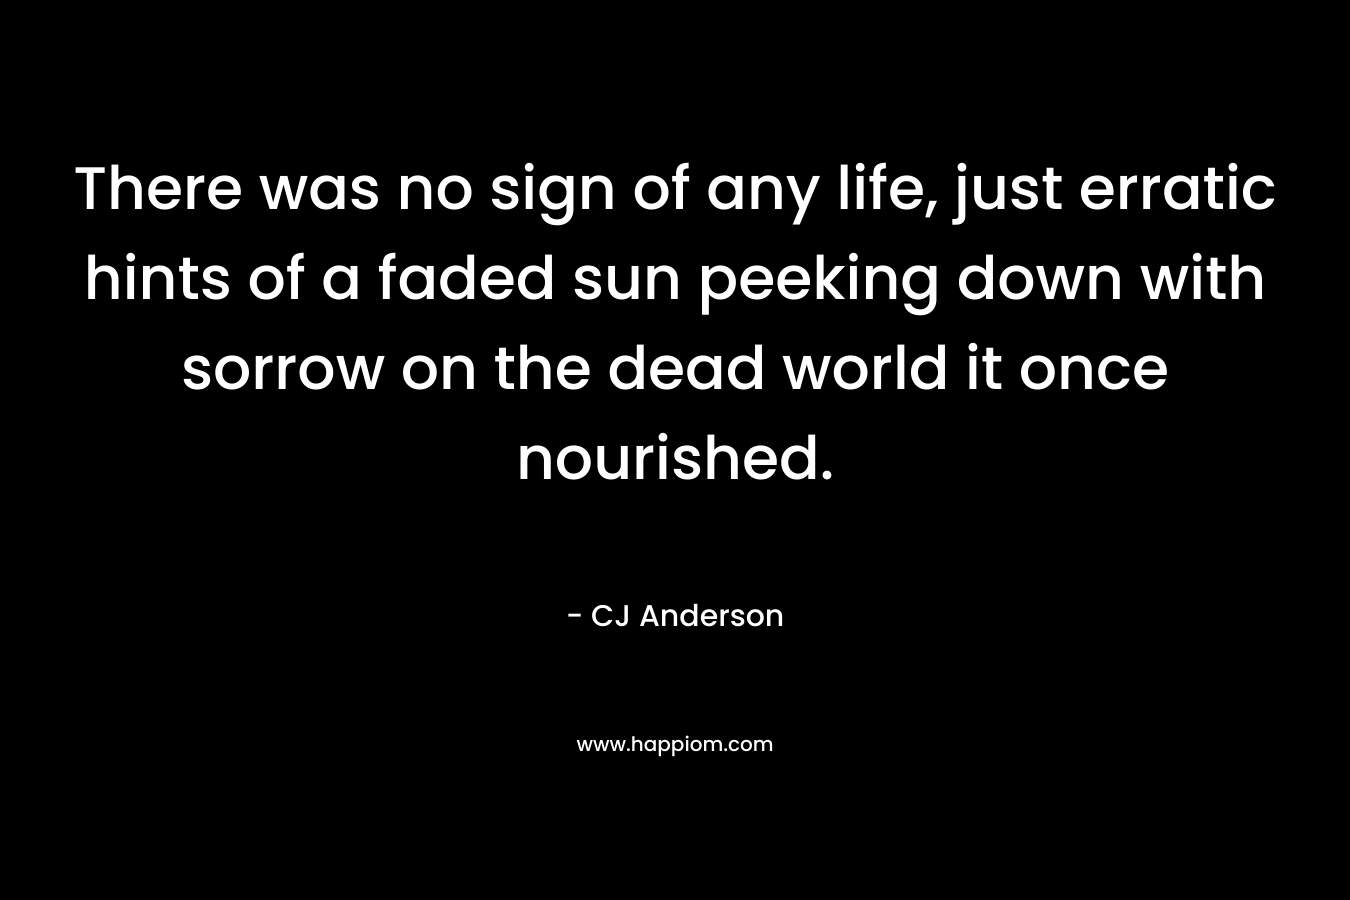 There was no sign of any life, just erratic hints of a faded sun peeking down with sorrow on the dead world it once nourished. – CJ Anderson